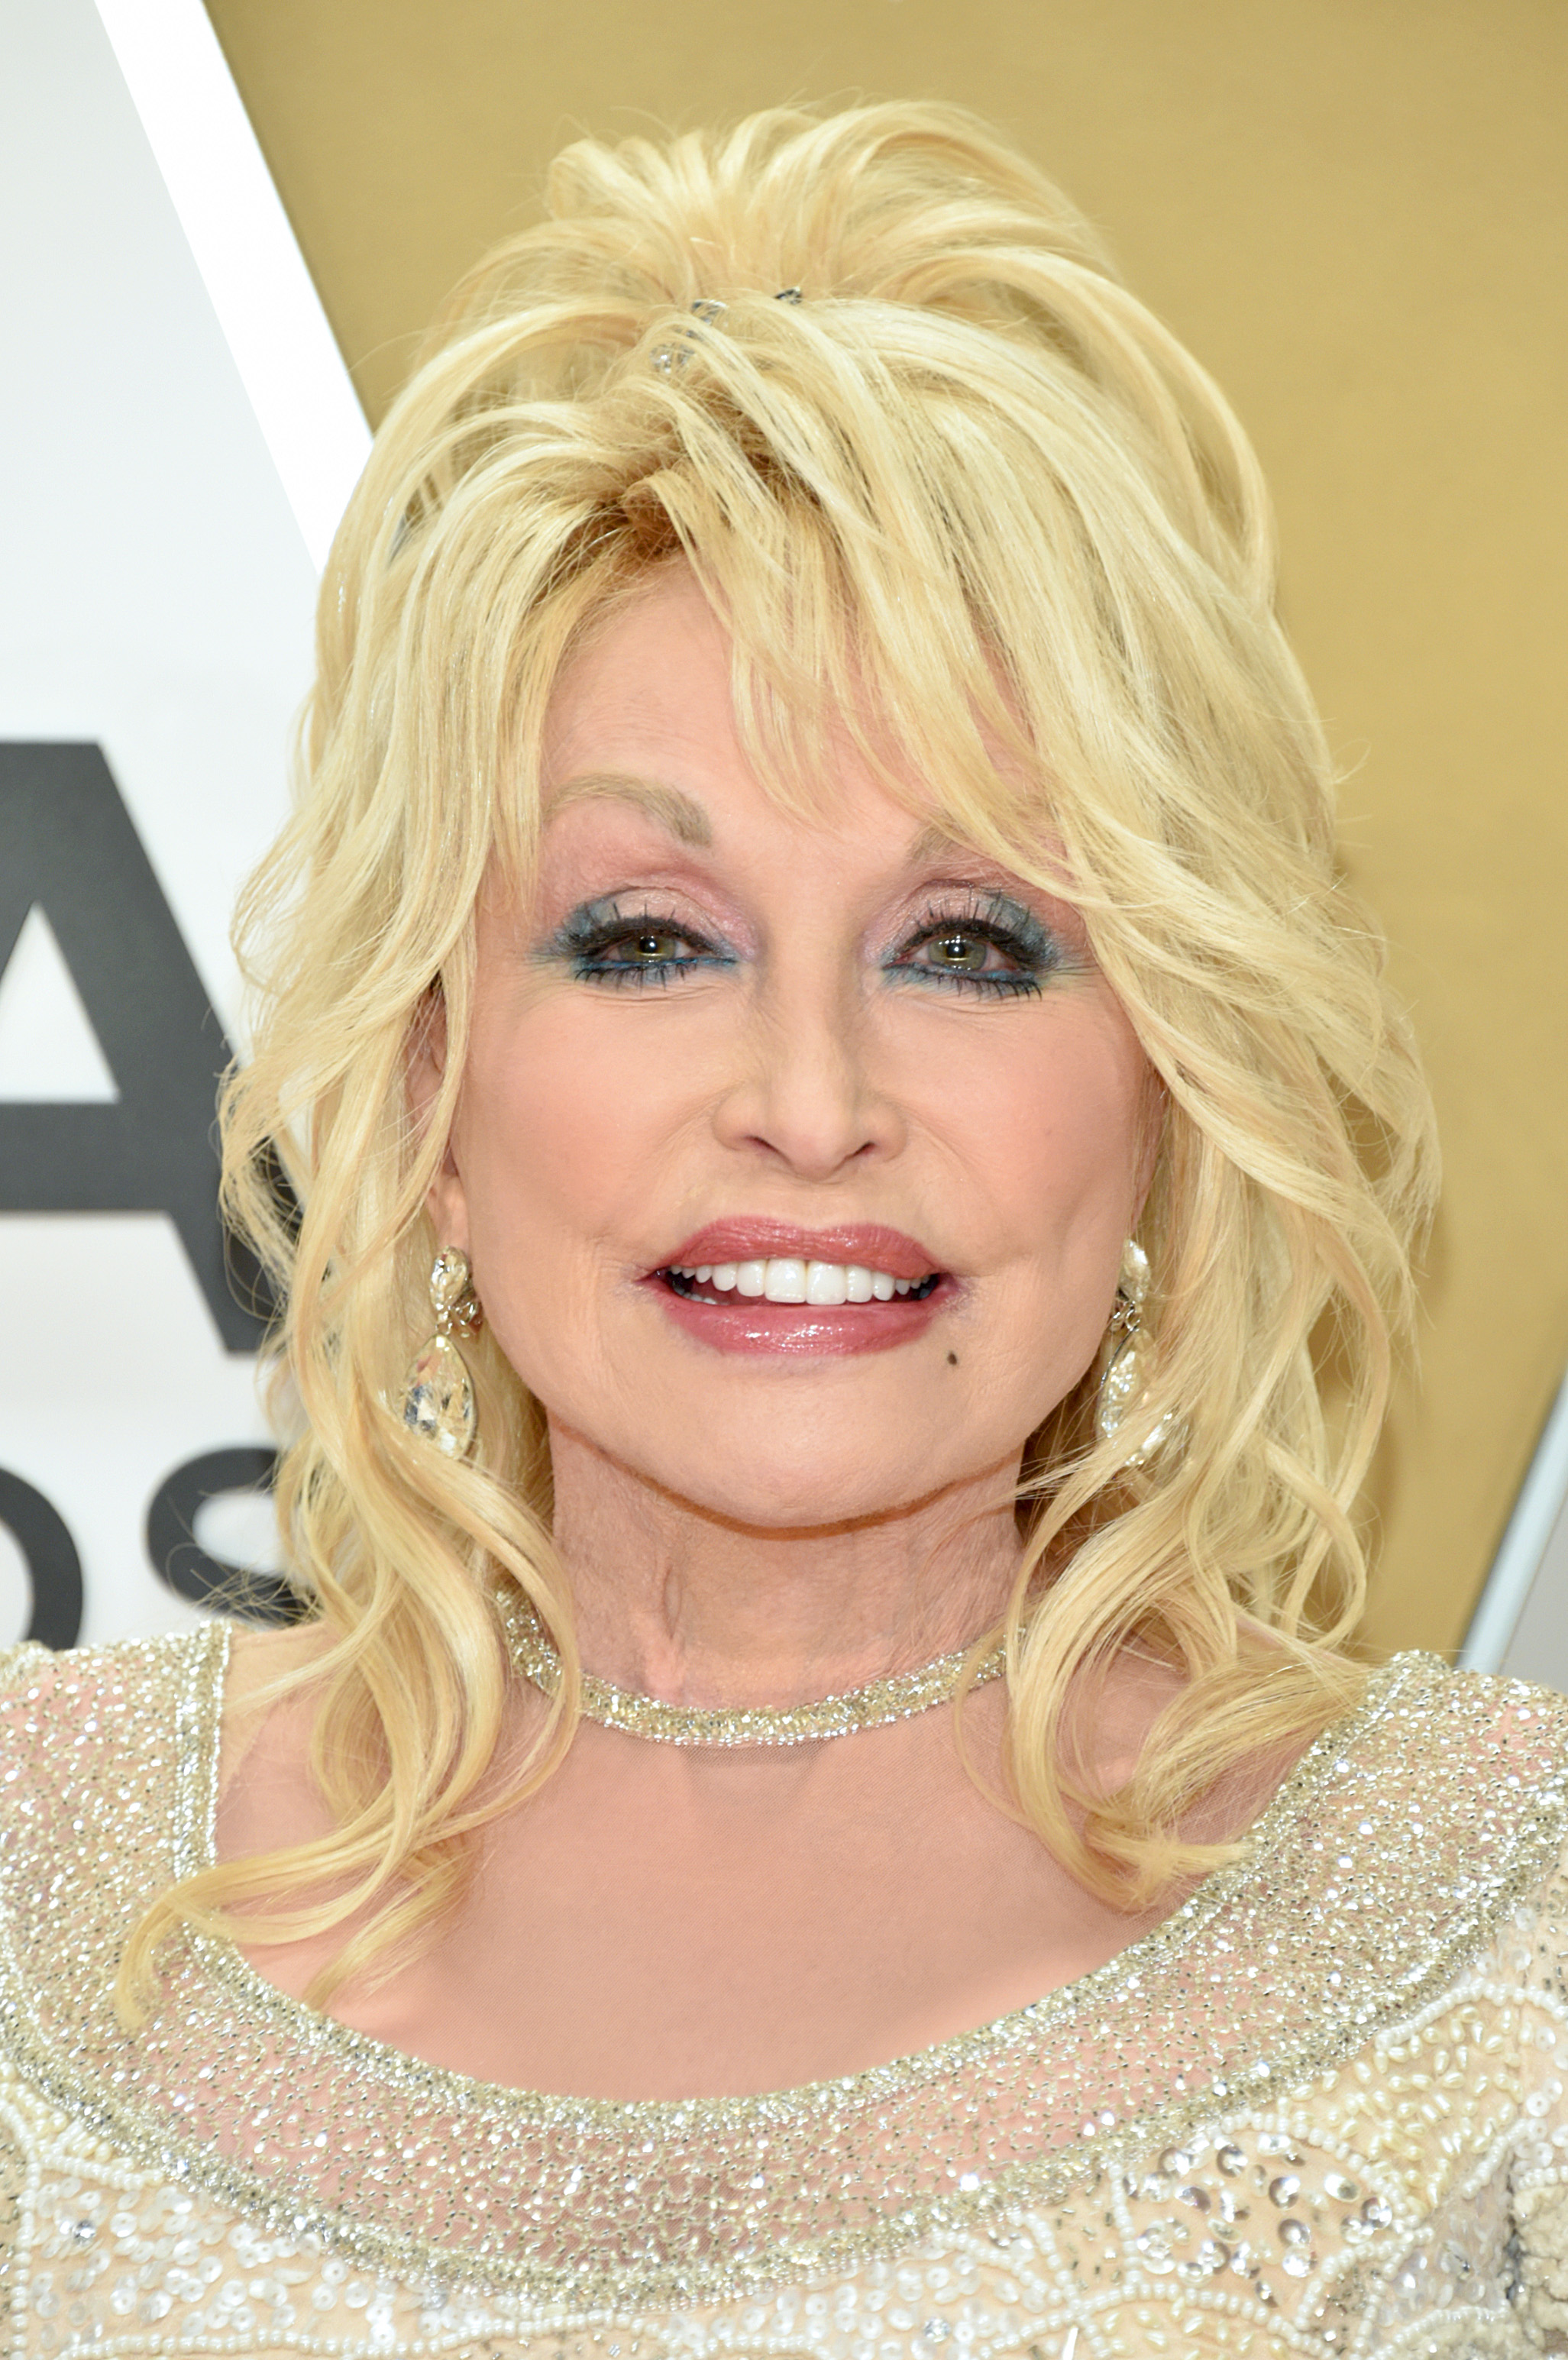 Dolly Parton at the 53rd annual CMA Awards, held at the Music City Center in Nashville, Tennessee, on November 13, 2019. | Source: Getty Images